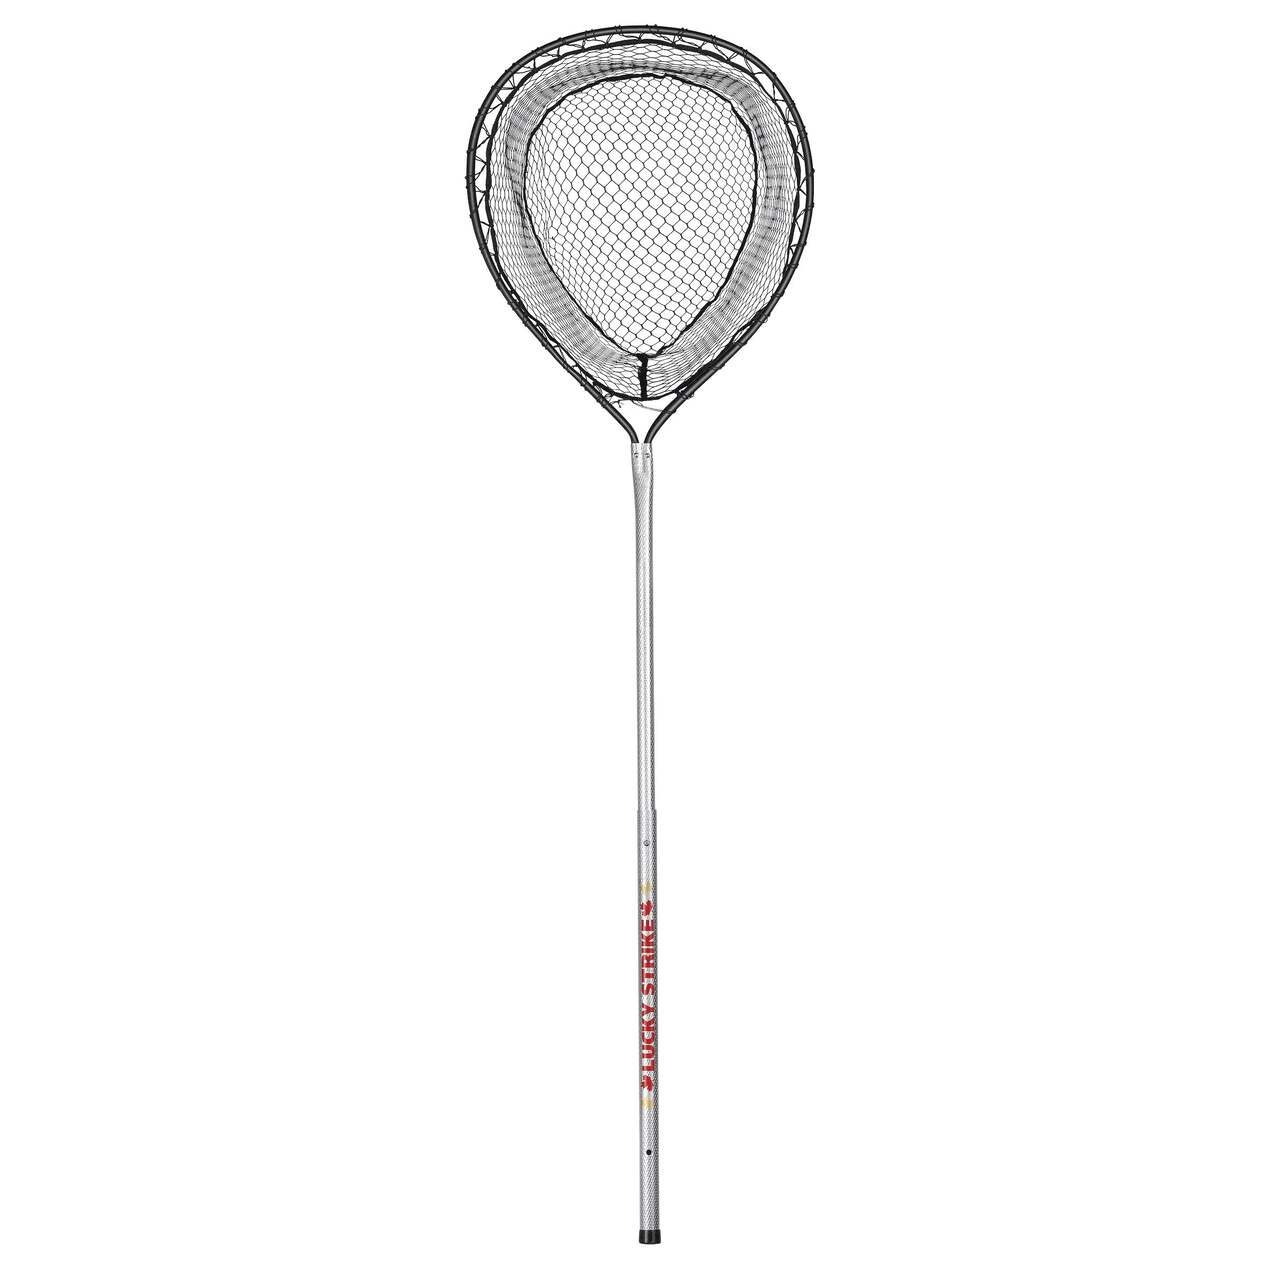 https://media-www.canadiantire.ca/product/playing/fishing/fishing-accessories/0780440/lucky-strike-basket-net-with-removable-handle-034ce652-e22a-462c-8041-9b6bd540855f-jpgrendition.jpg?imdensity=1&imwidth=640&impolicy=mZoom